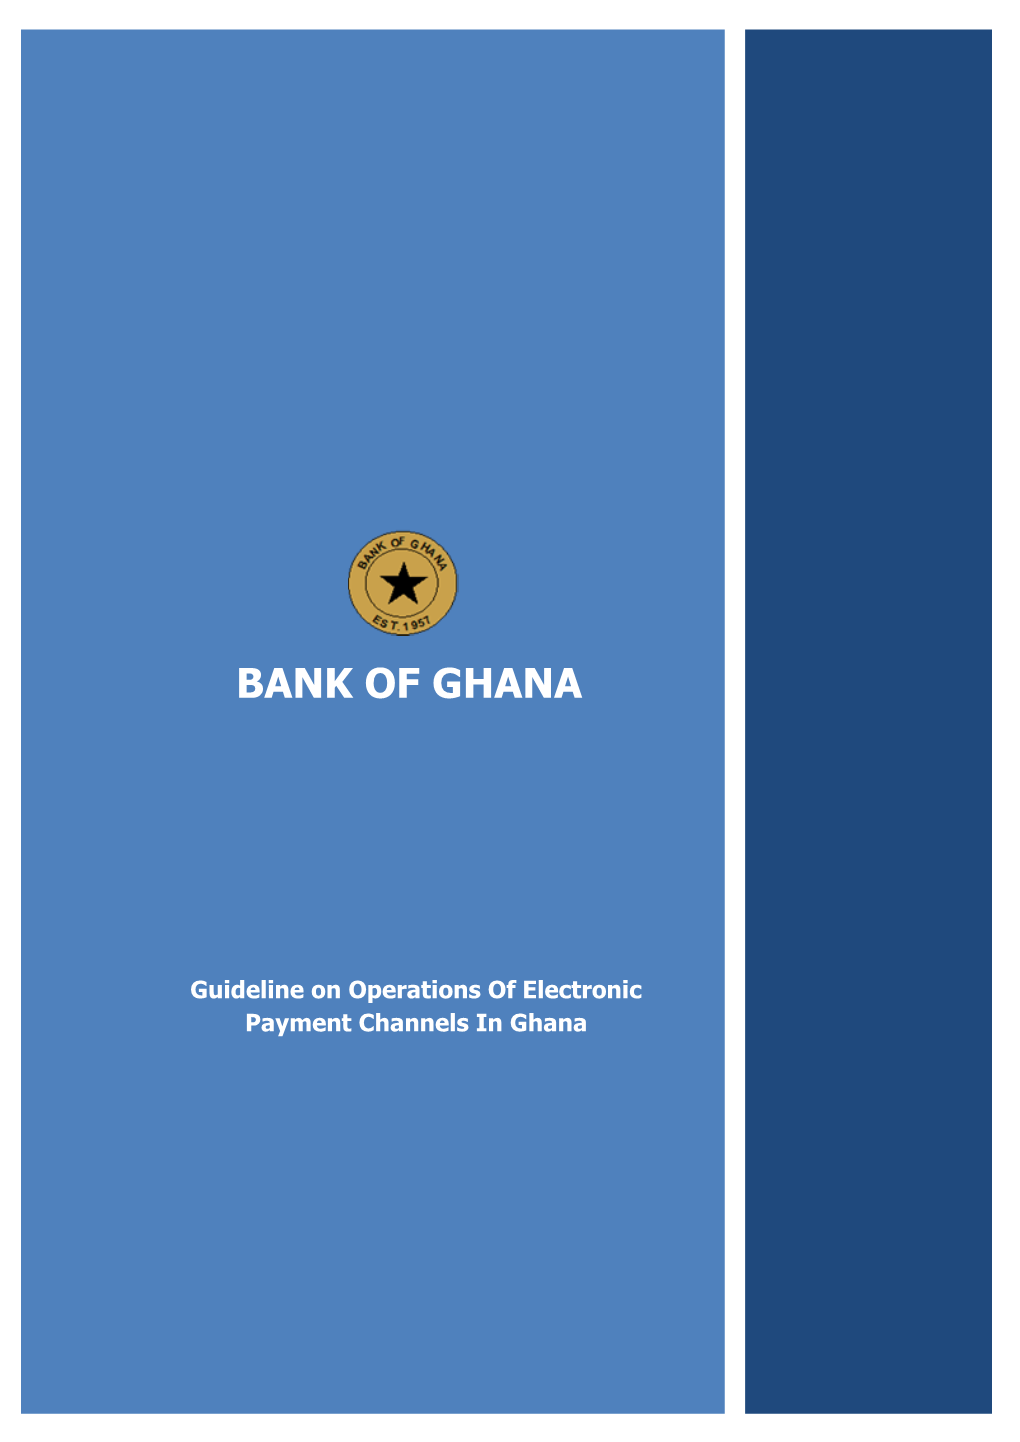 Guidelines on Operations of Electronic Payment Channels in Ghana